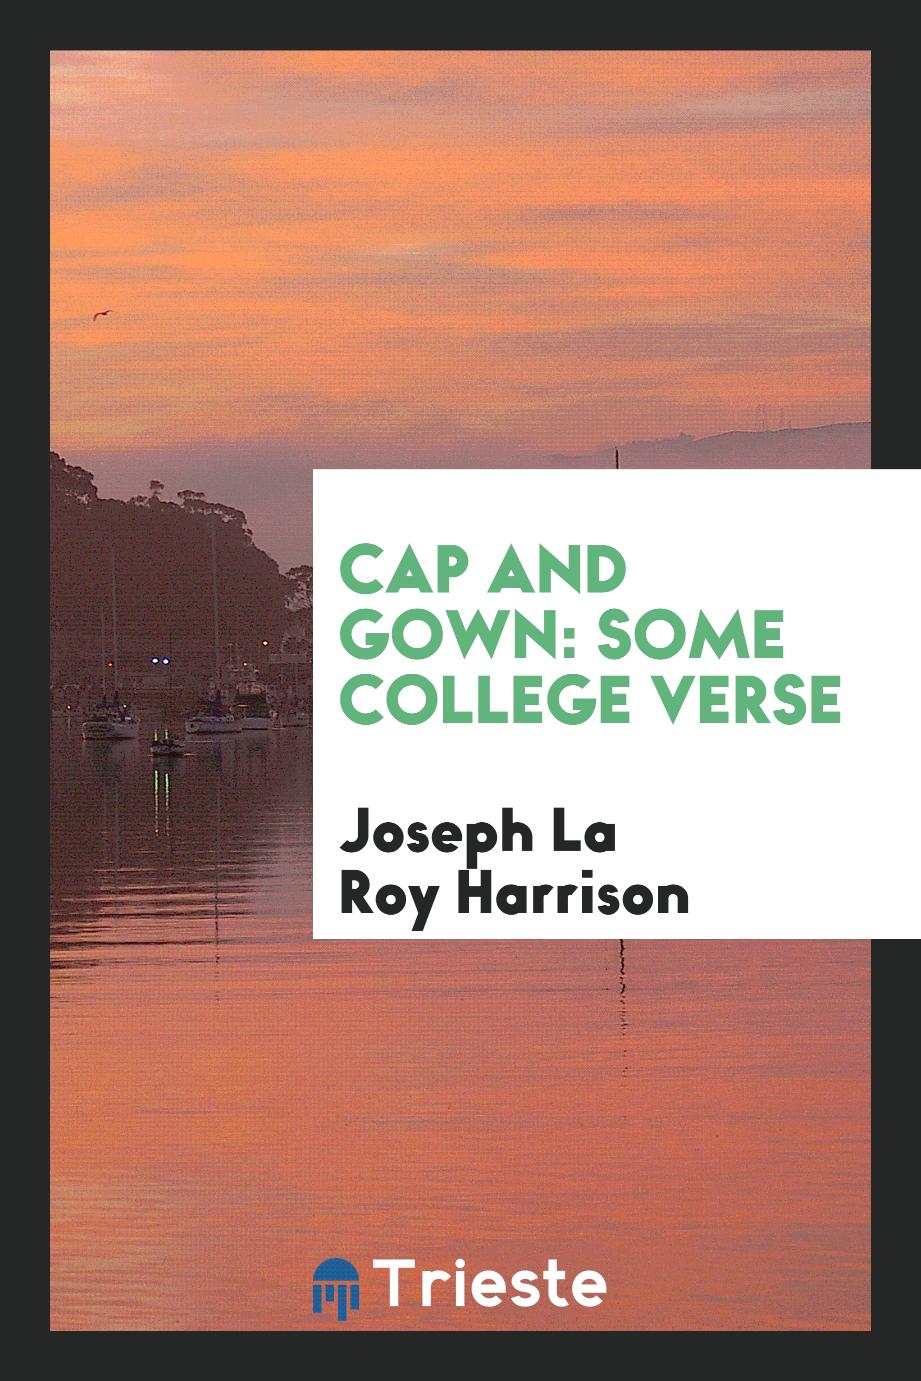 Cap and Gown: Some College Verse